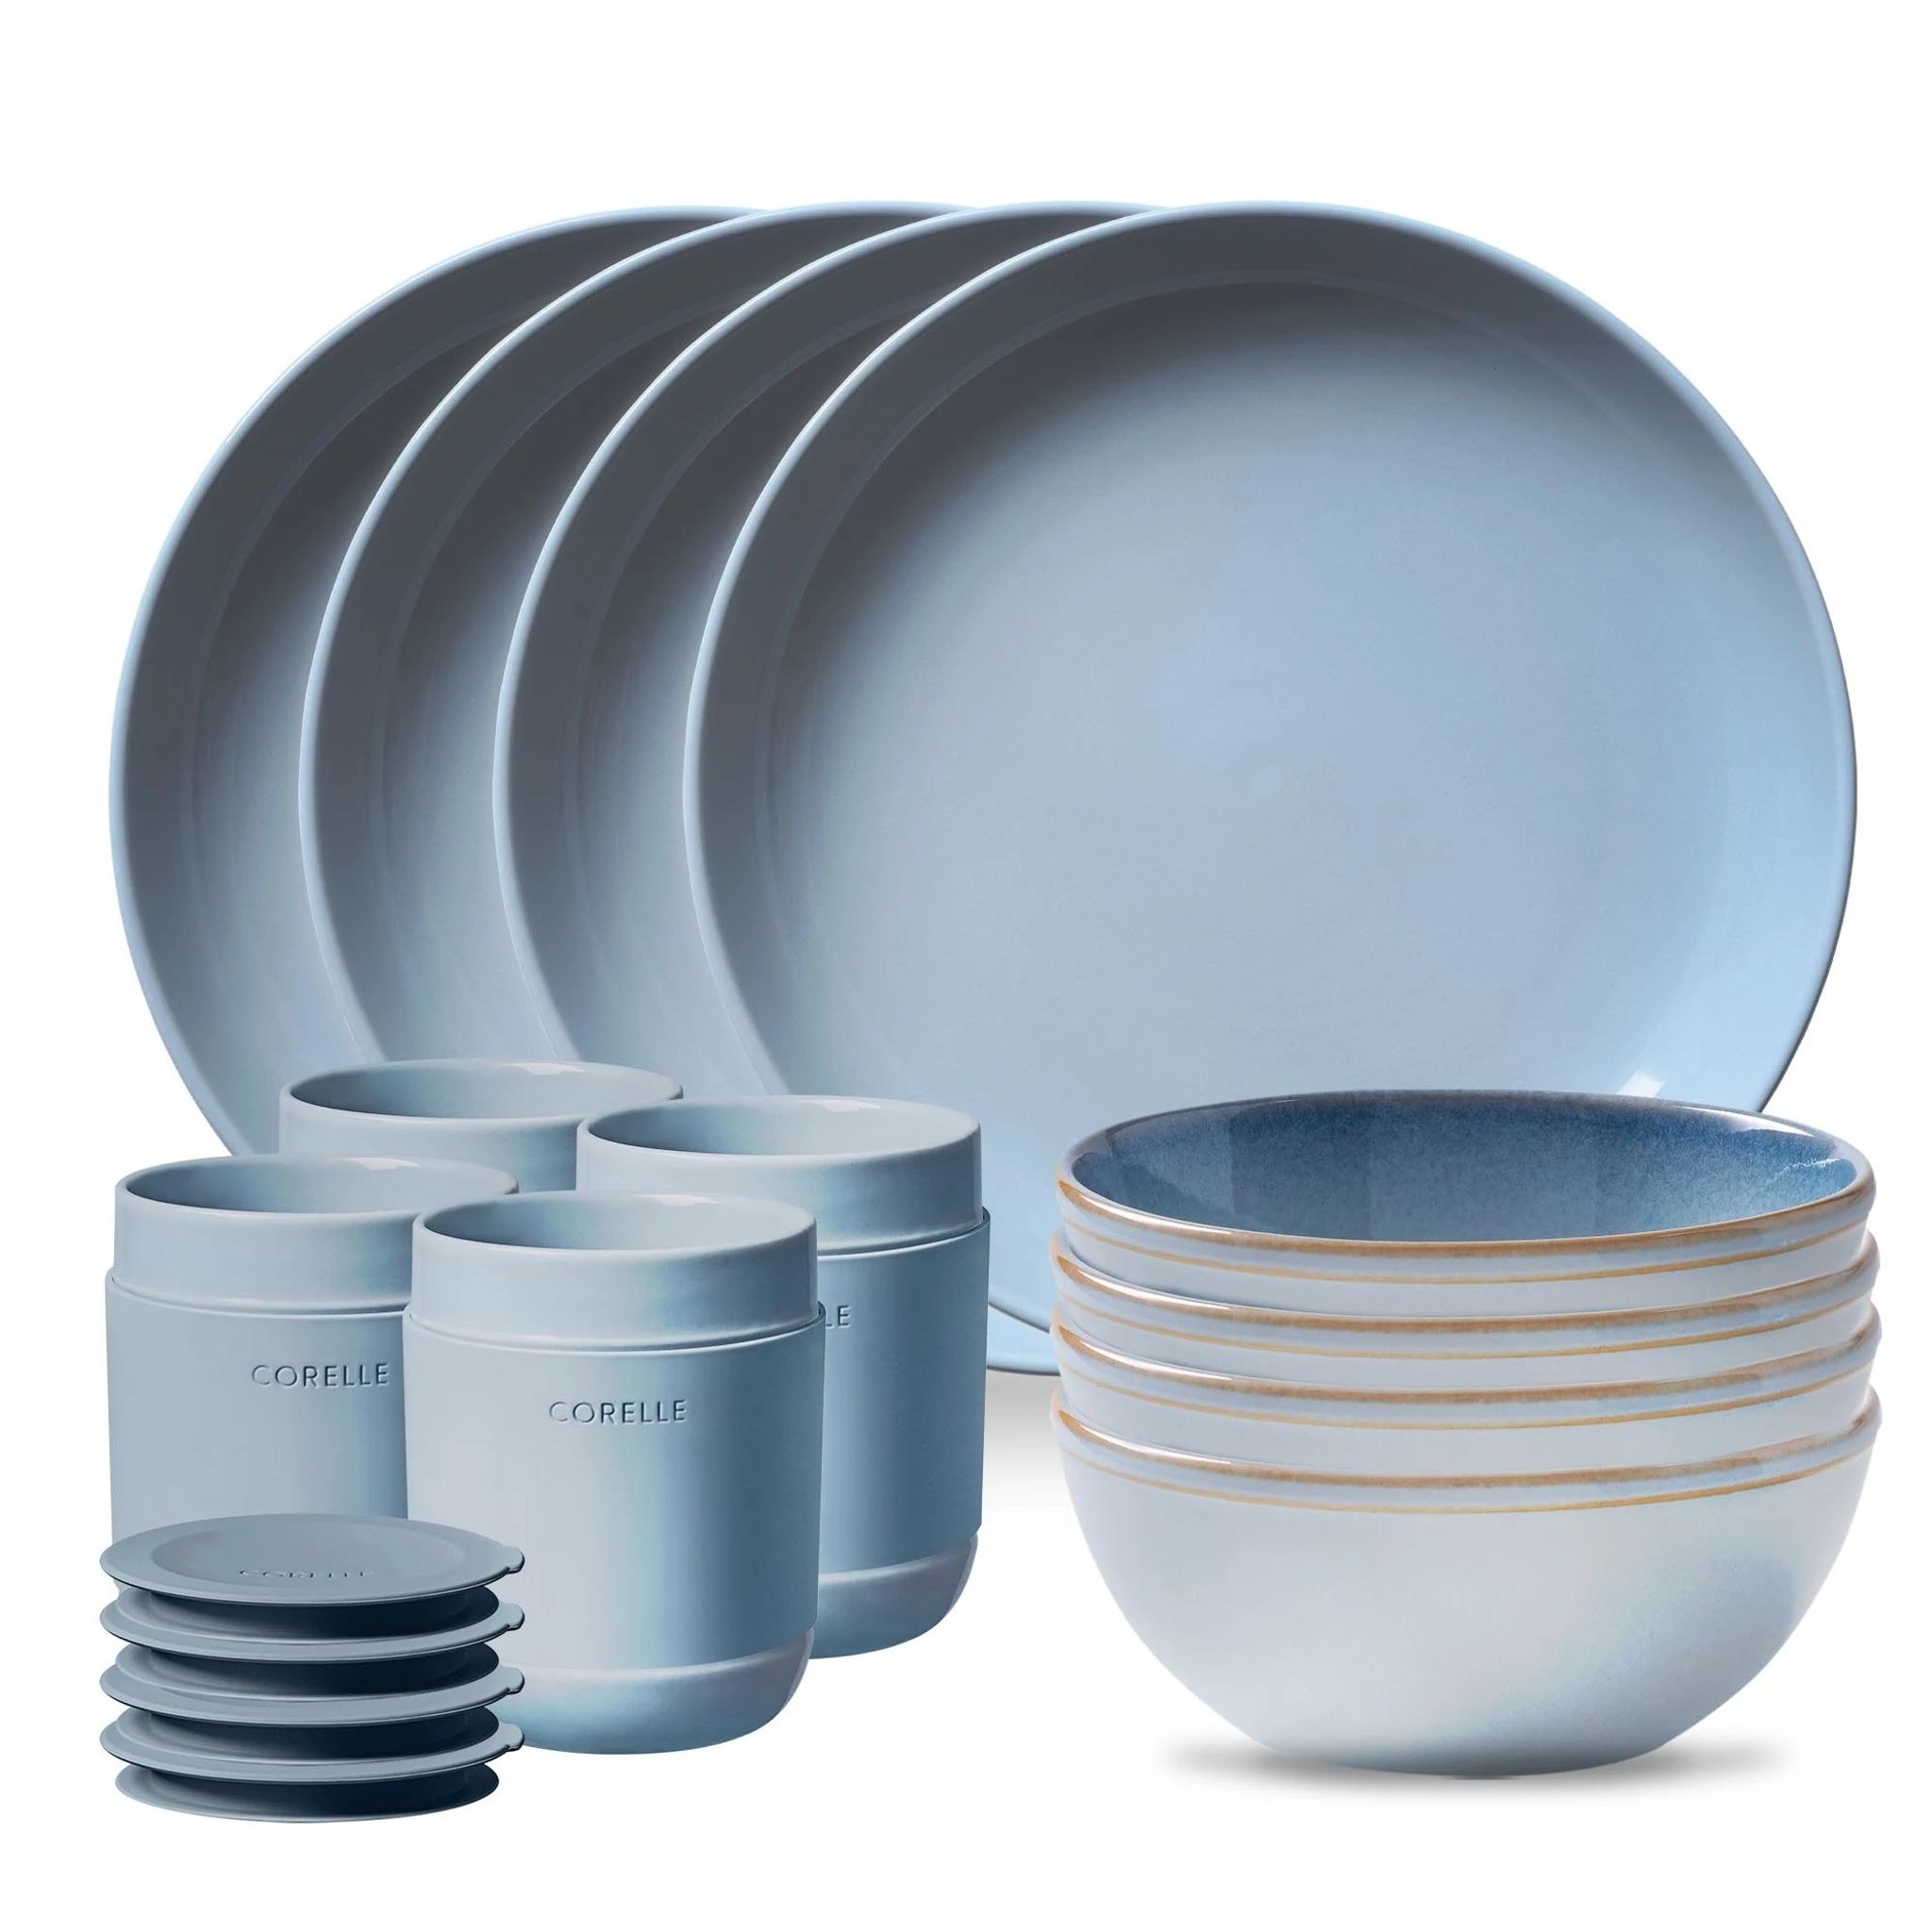 The dinnerware set including cups, bowls, and plates in a stone blue color